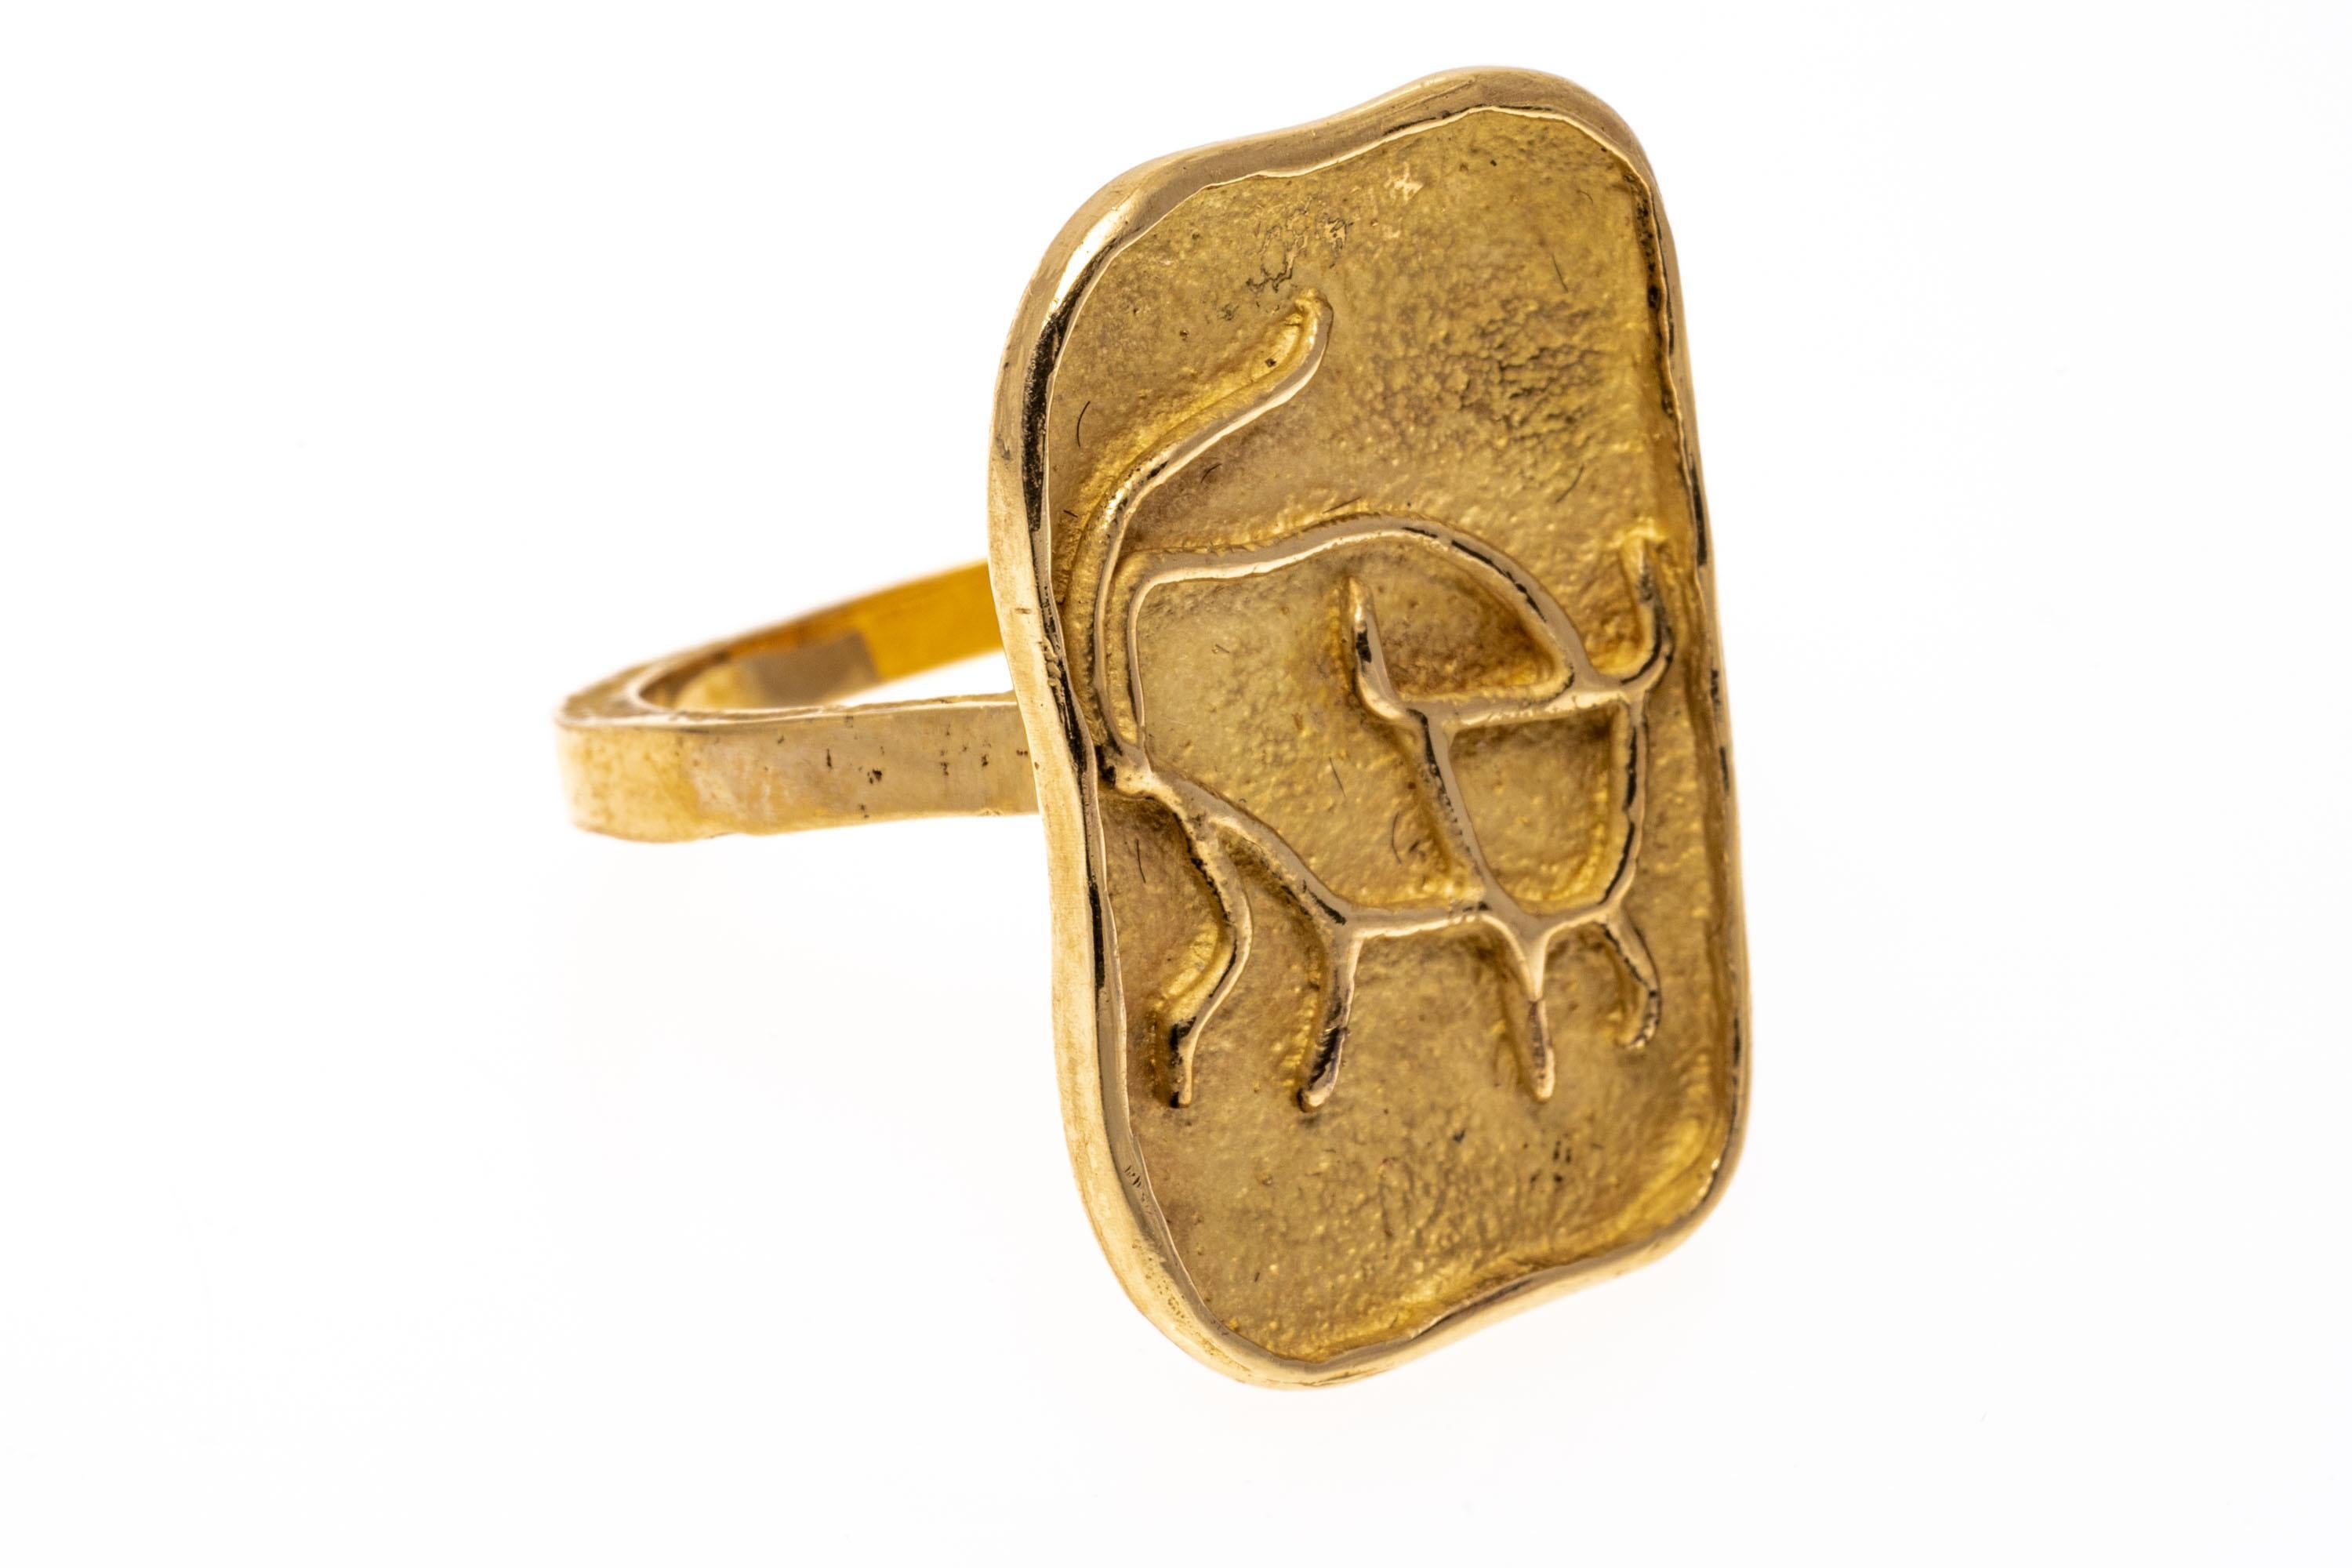 14k yellow gold ring. This striking yellow gold ring has a free-form rectangular center, decorated with a high polished relief of a line drawn Taurus bull motif, edged with a raw-edged shank.
Marks: 14k
Dimensions: 9/16